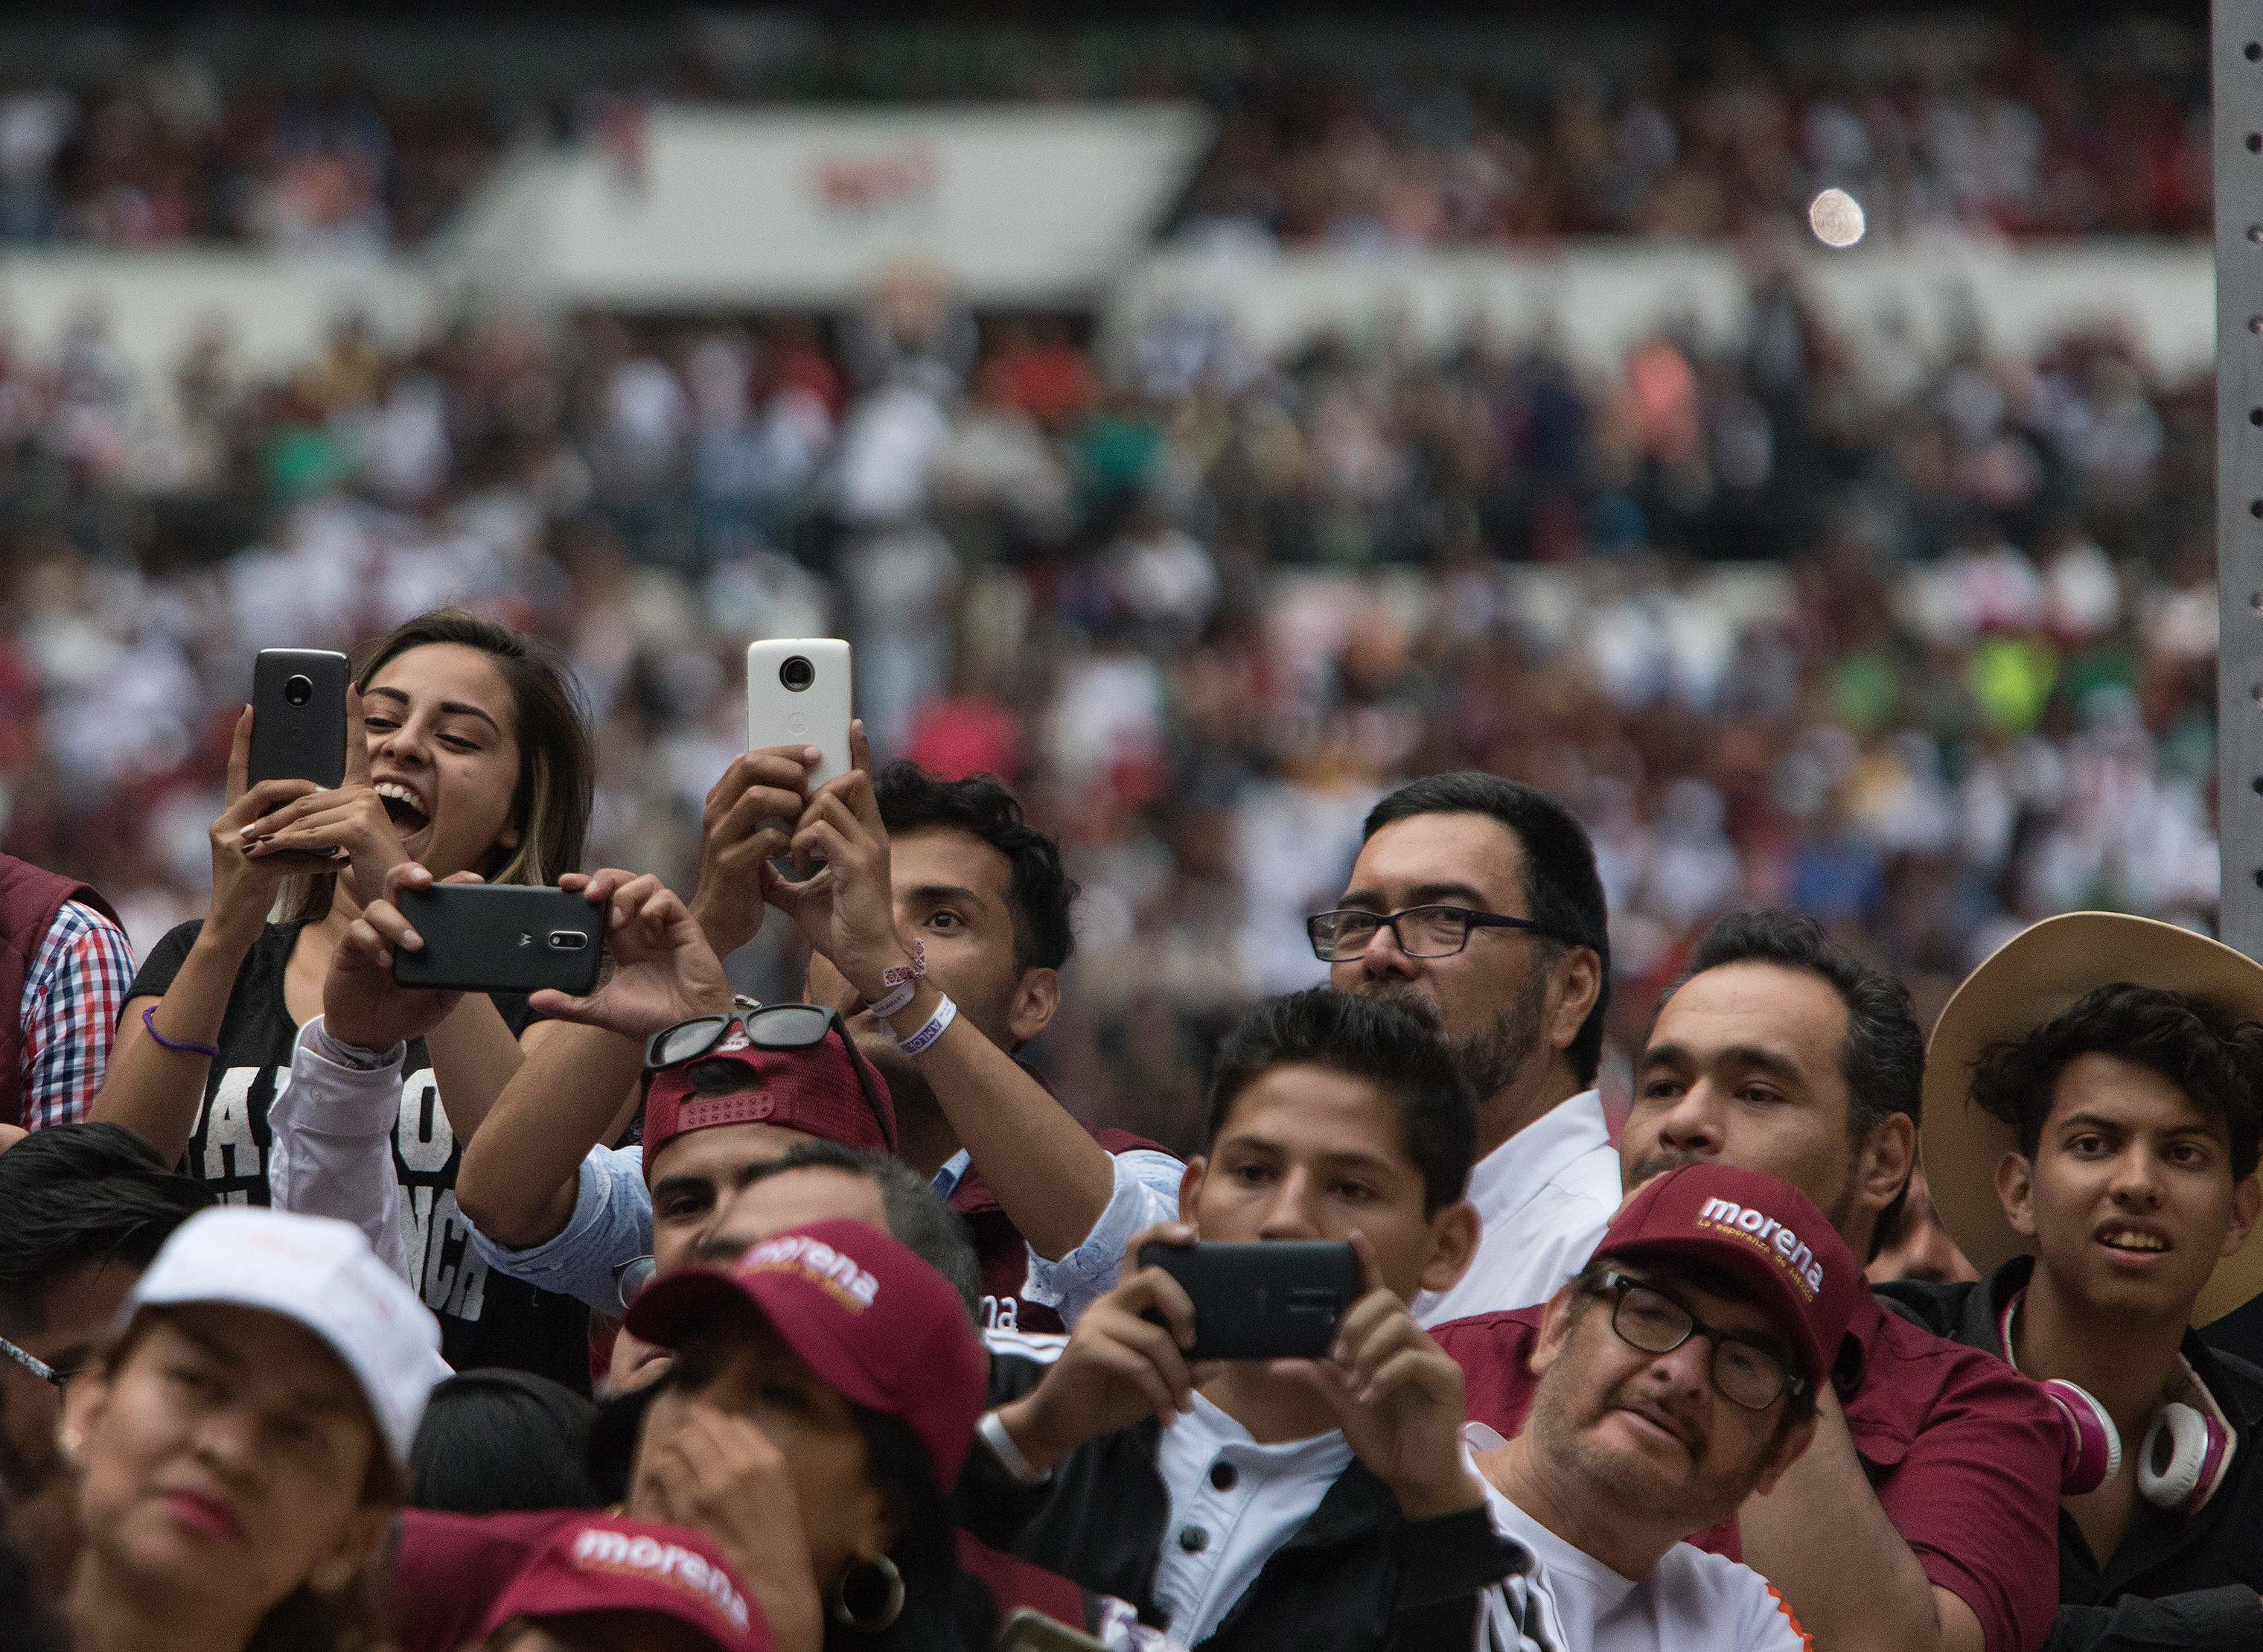 Supporters hold up their mobile phones during a musical performance at López Obrador's final campaign rally at Estadio Azetca in Mexico City on June 27. (Christopher Morris—VII for TIME)